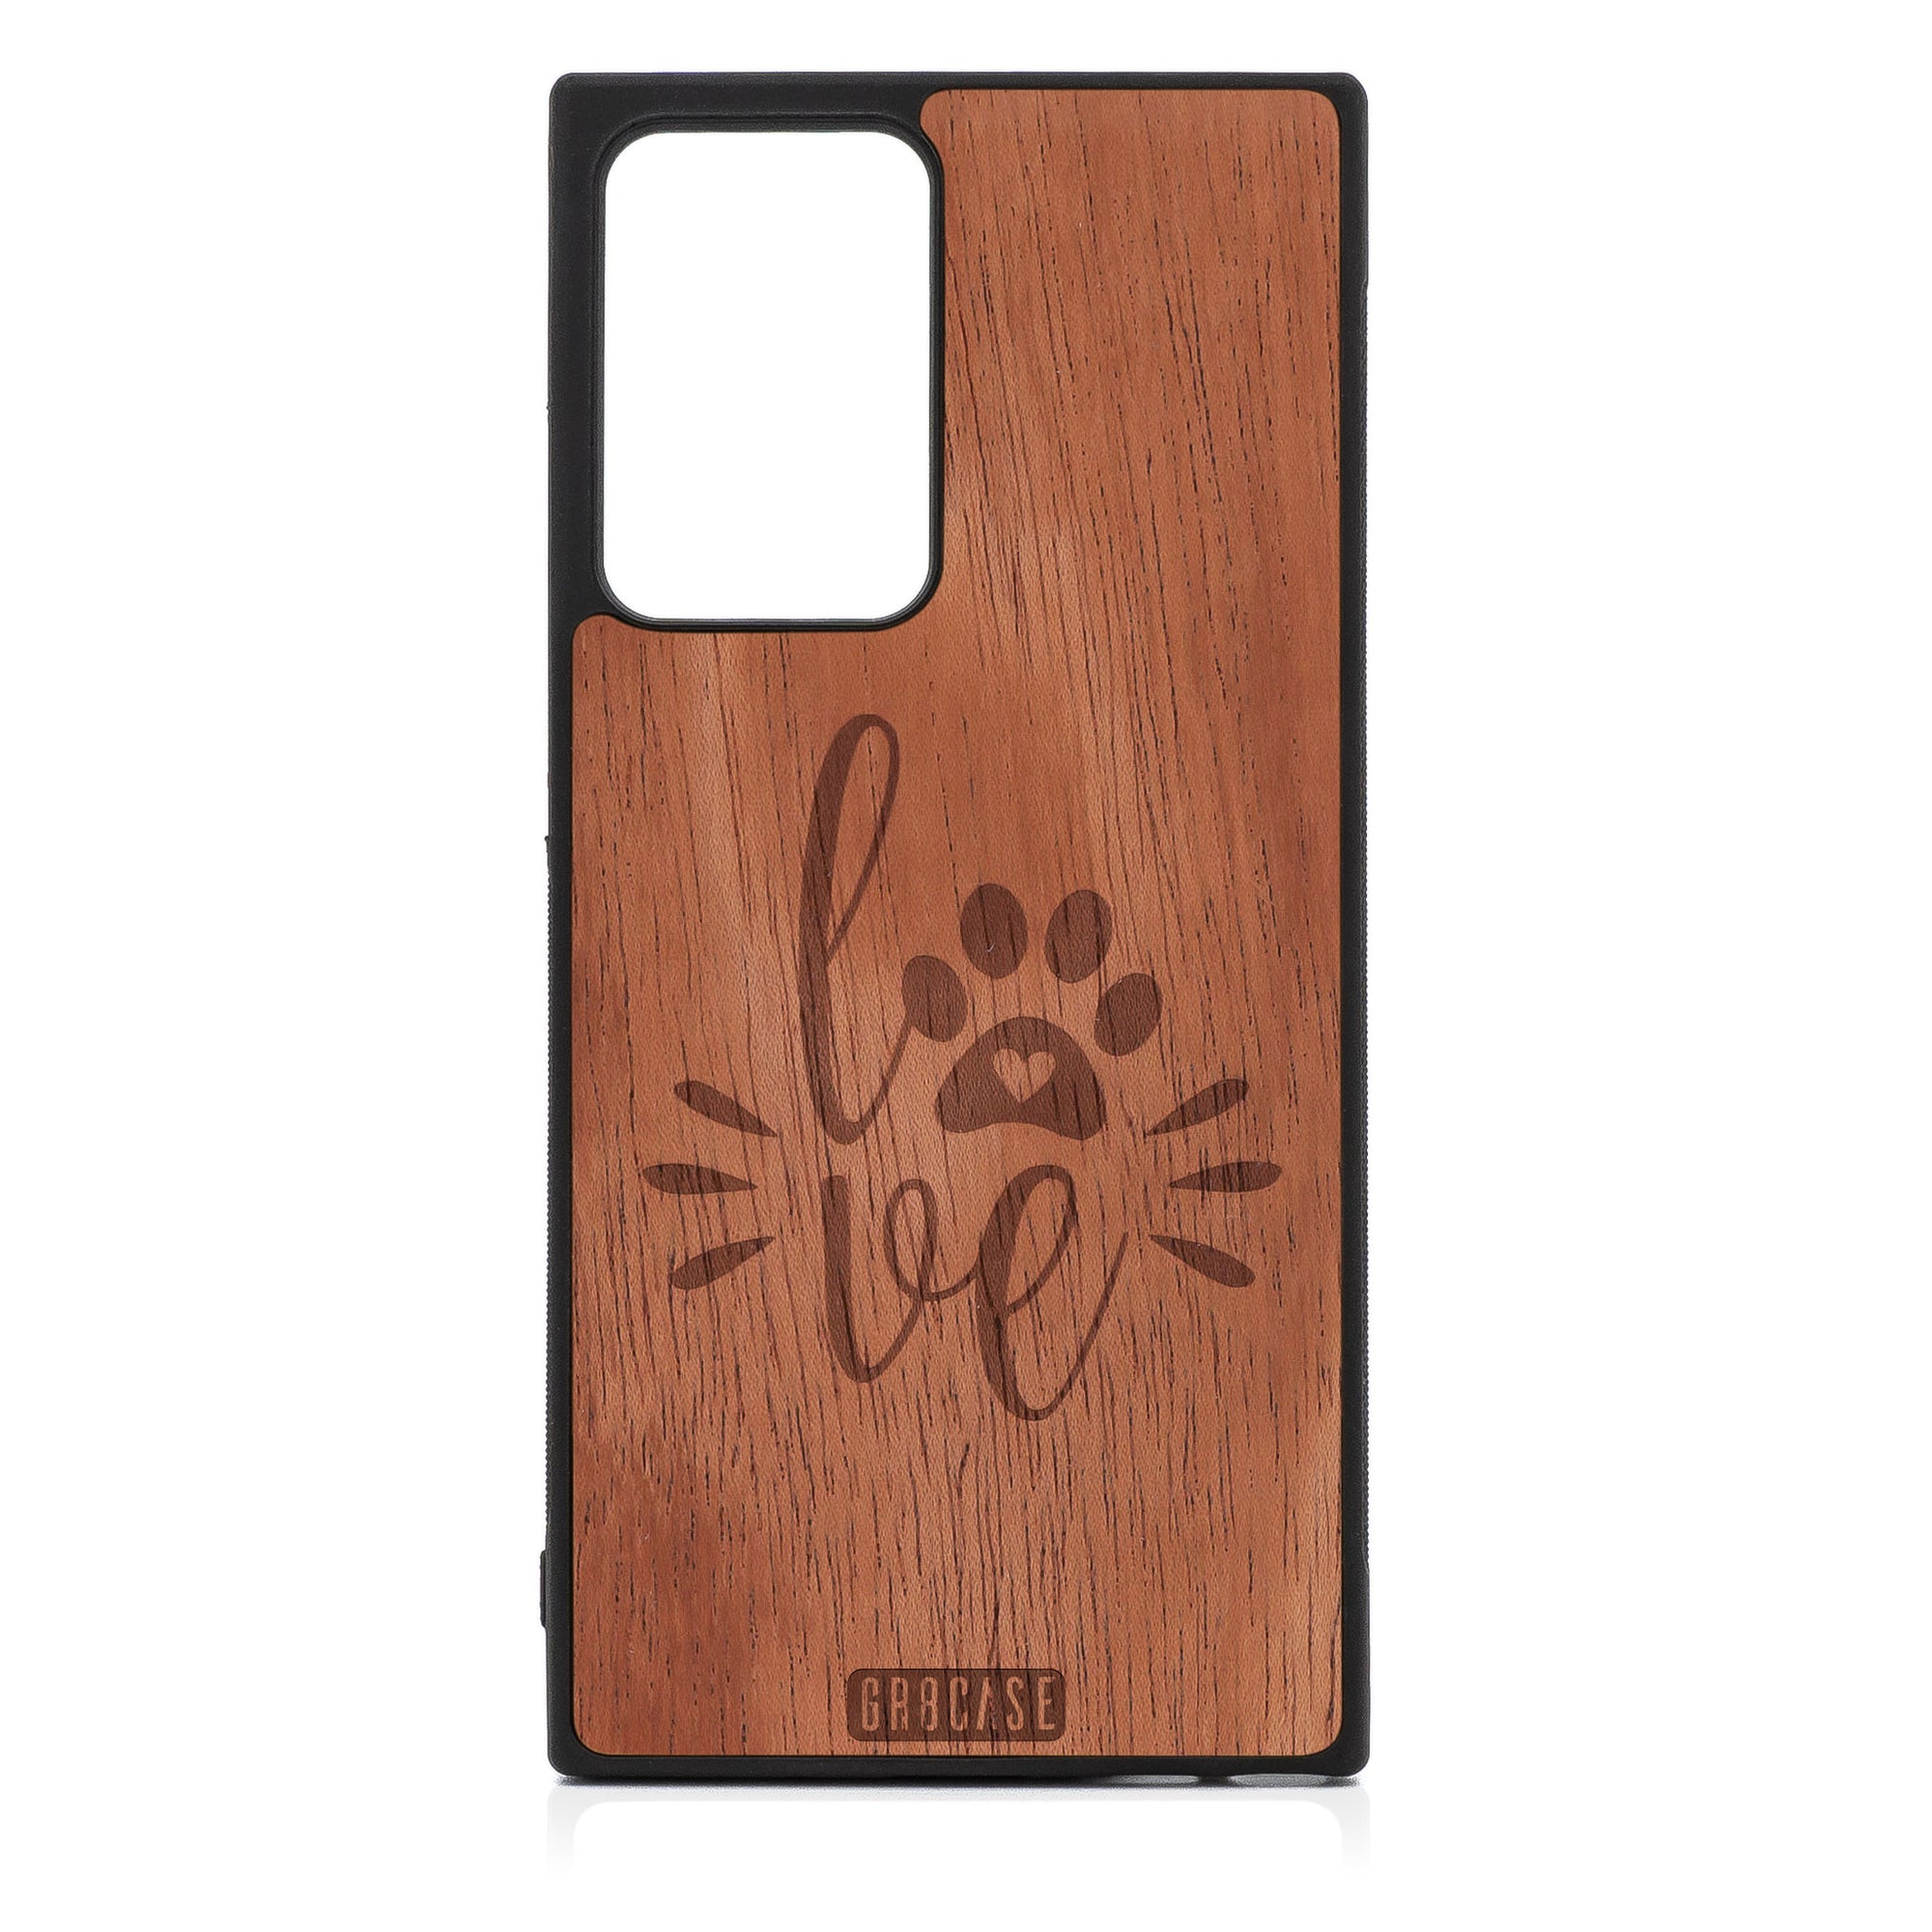 Paw Love Design Wood Case For Samsung Galaxy Note 20 Ultra